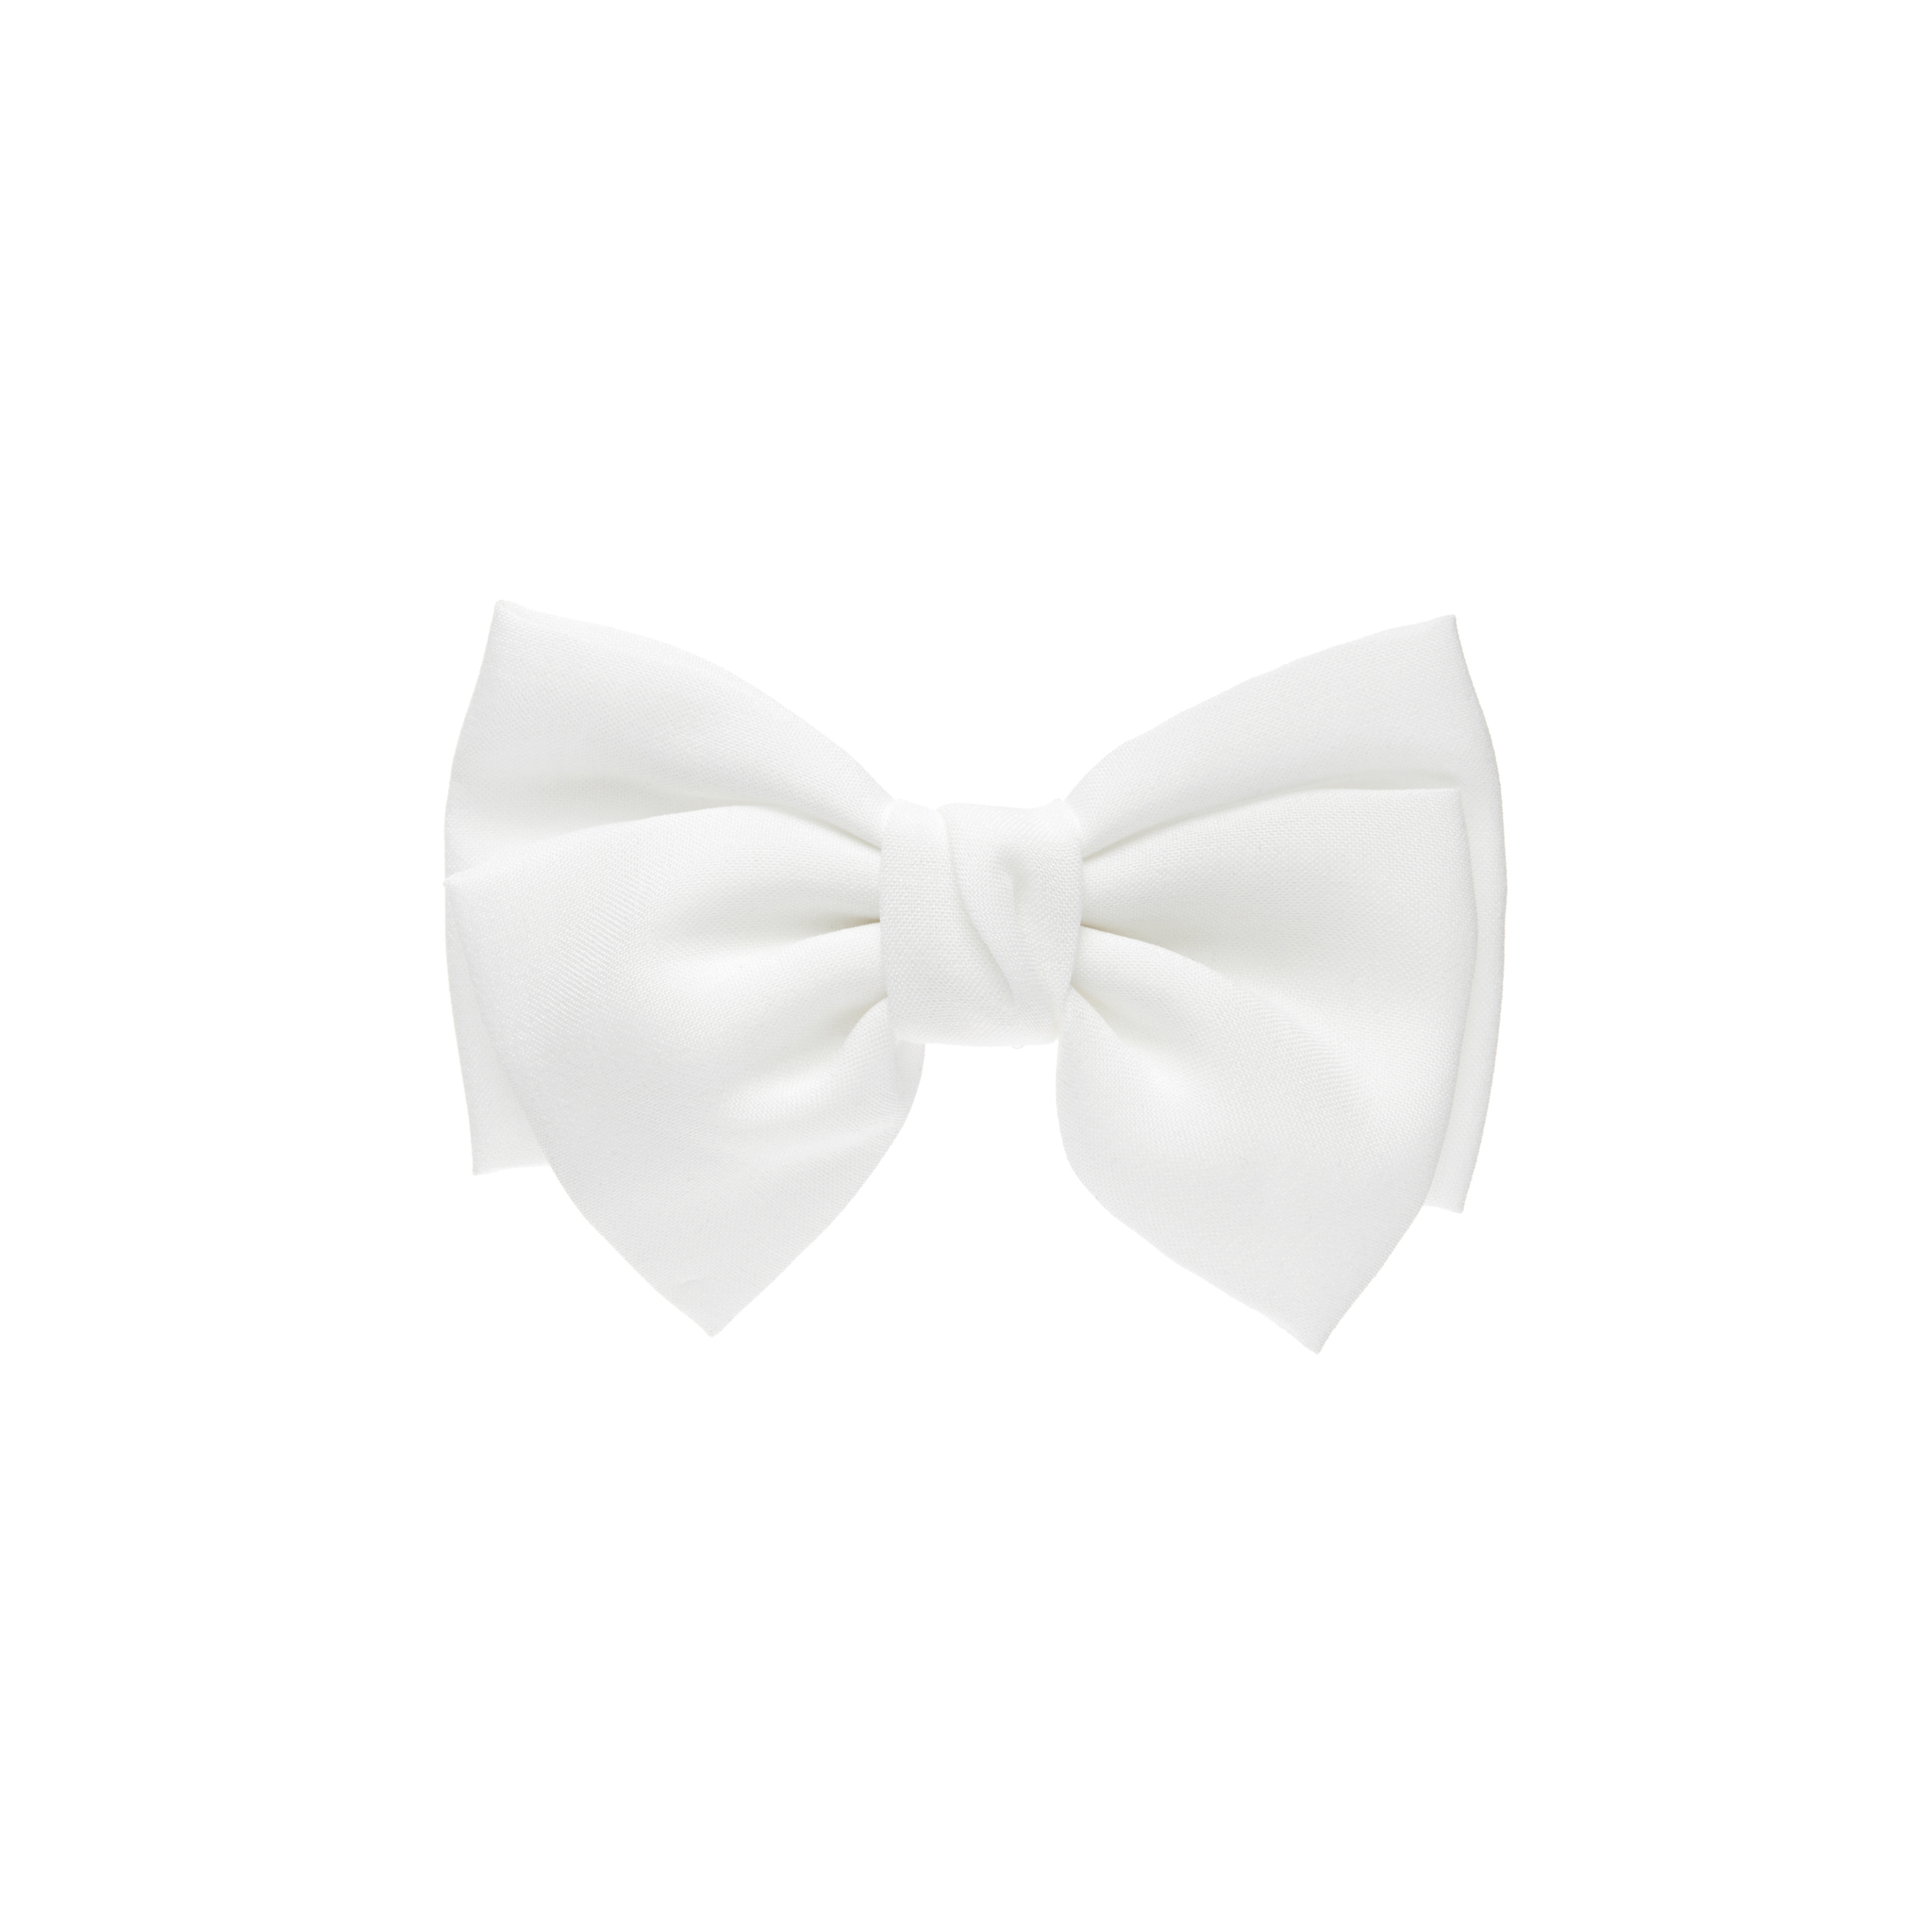 HOLLY JUNE Заколка Bow Hair Clip – White holly june серьга pearly bow earring